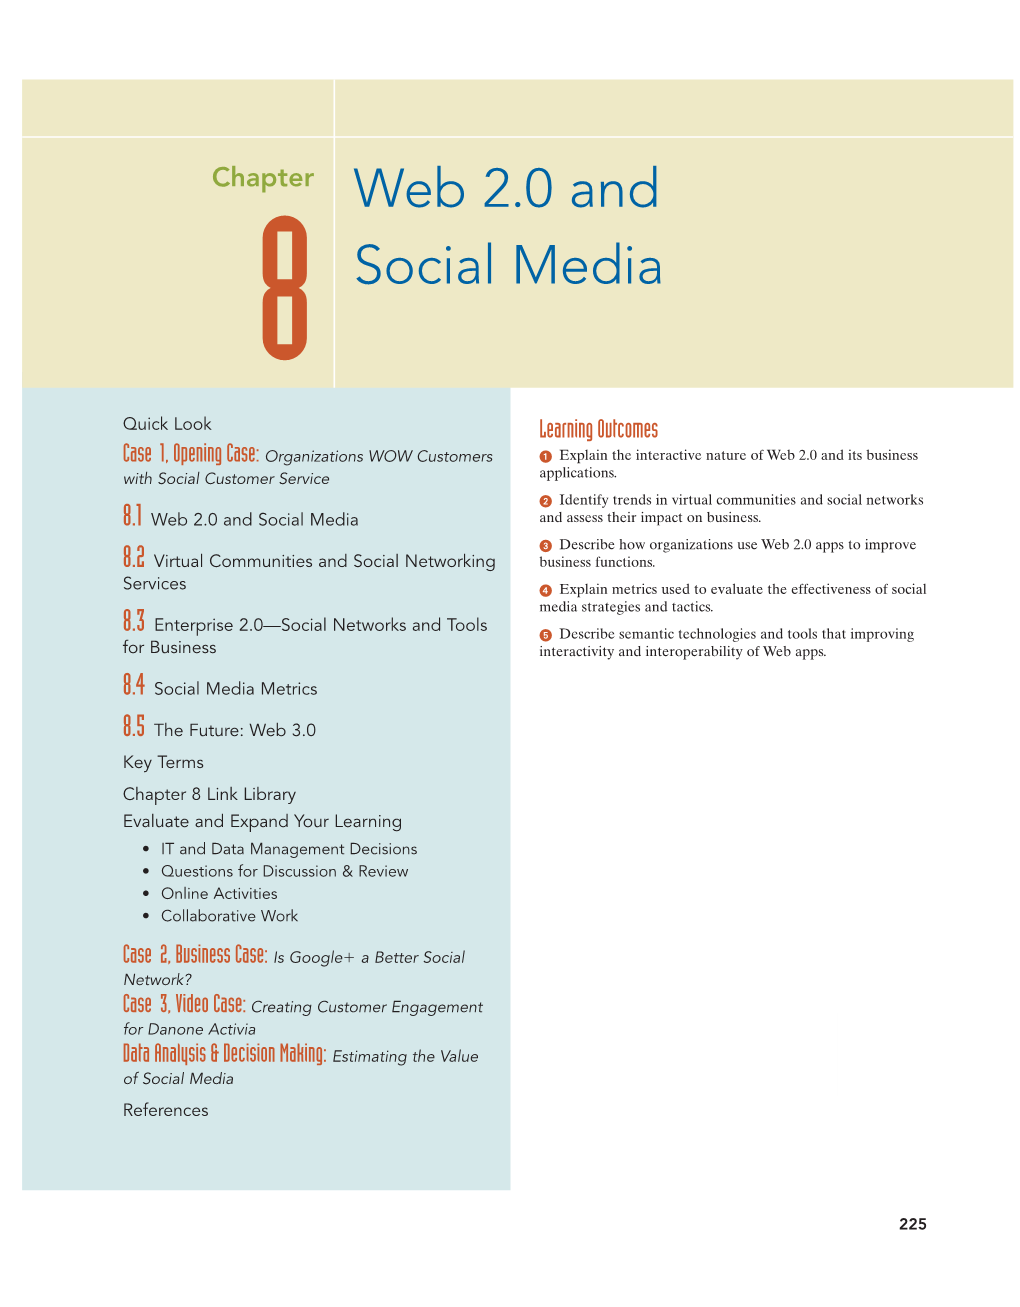 Web 2.0 and Social Media and Assess Their Impact on Business